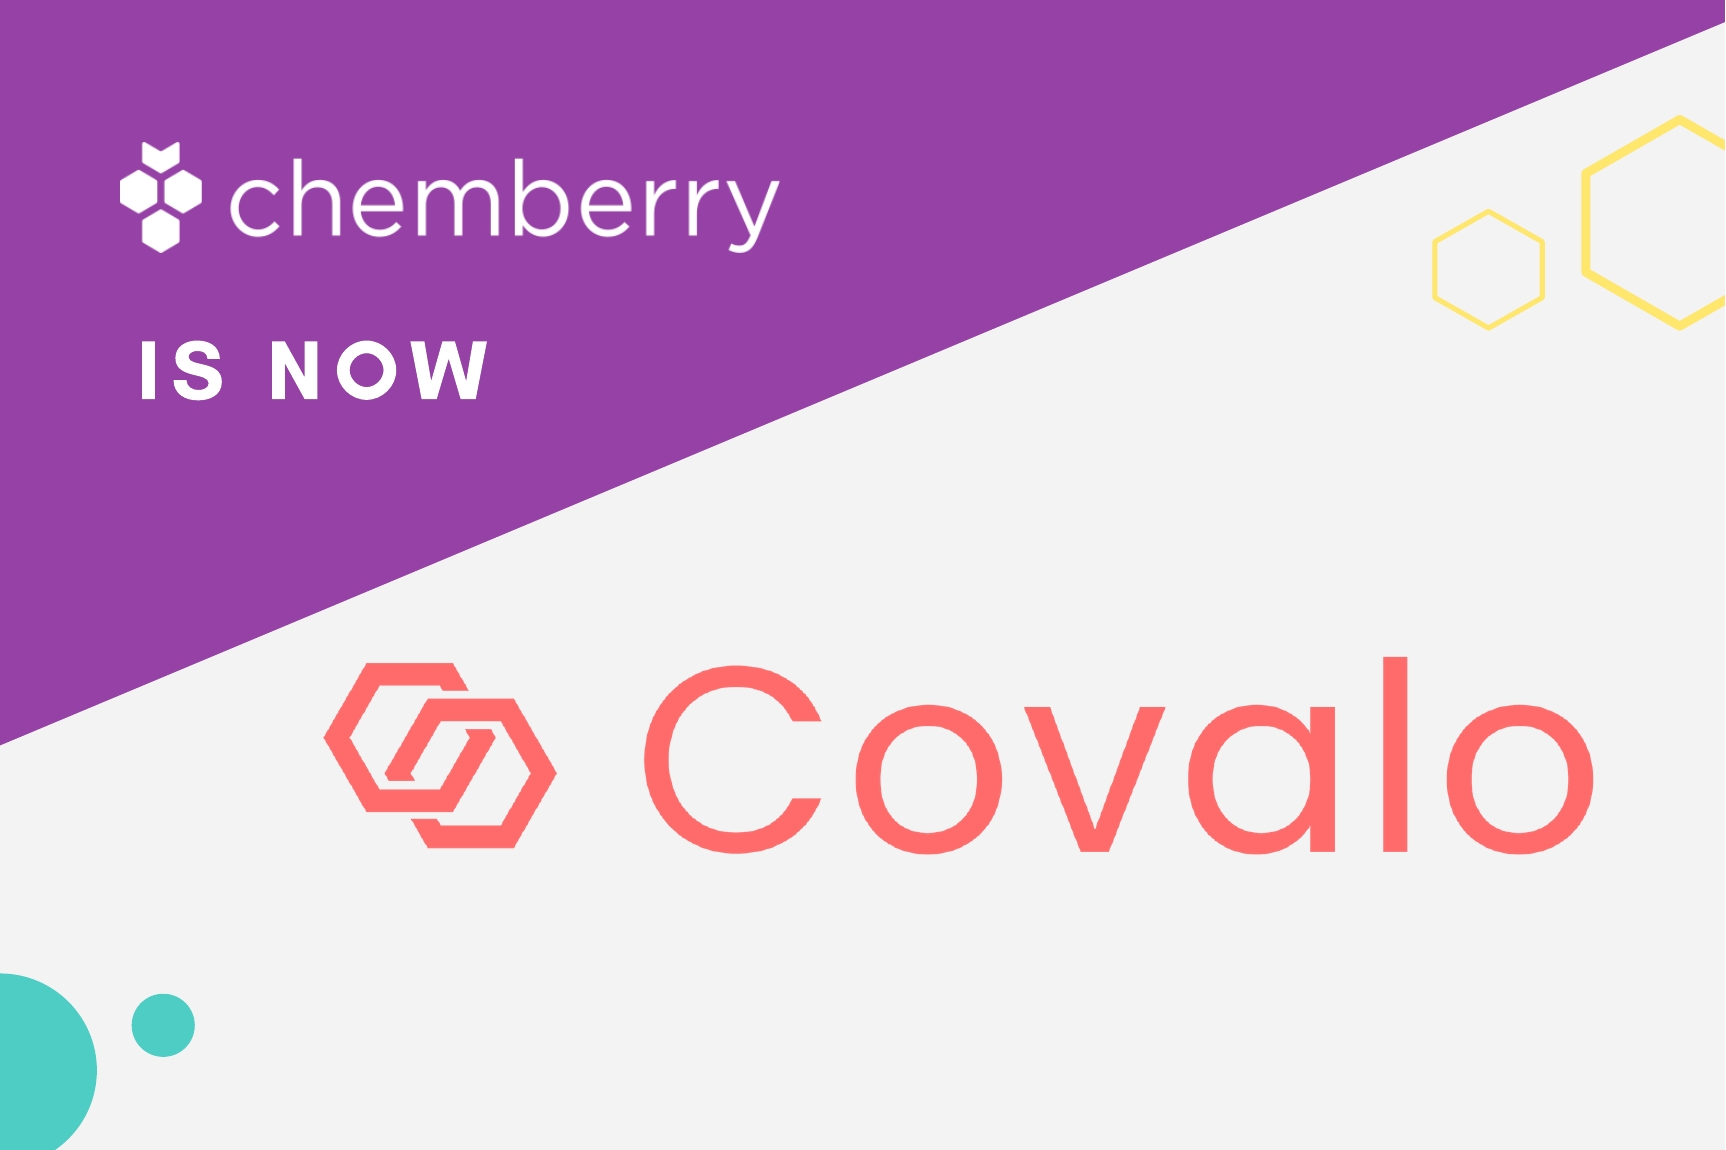 Introducing Covalo. Clariant's former ingredient search platform Chemberry expands its vision to e...